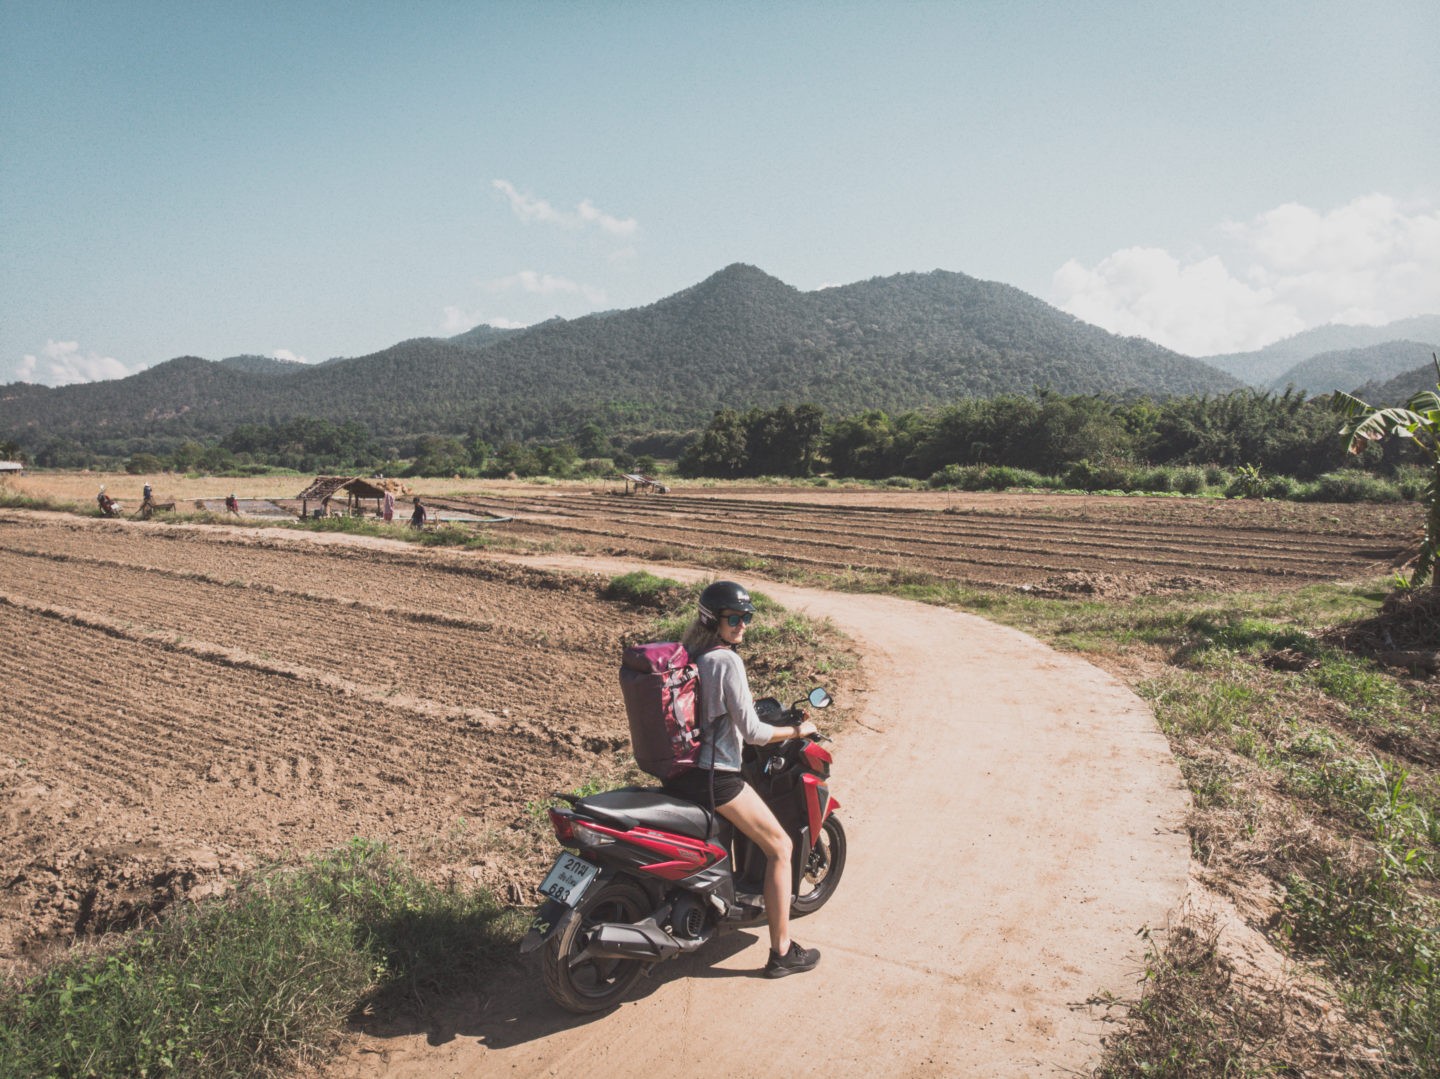 A woman riding a motorcycle on a dirt road with her Nomad Backpack.